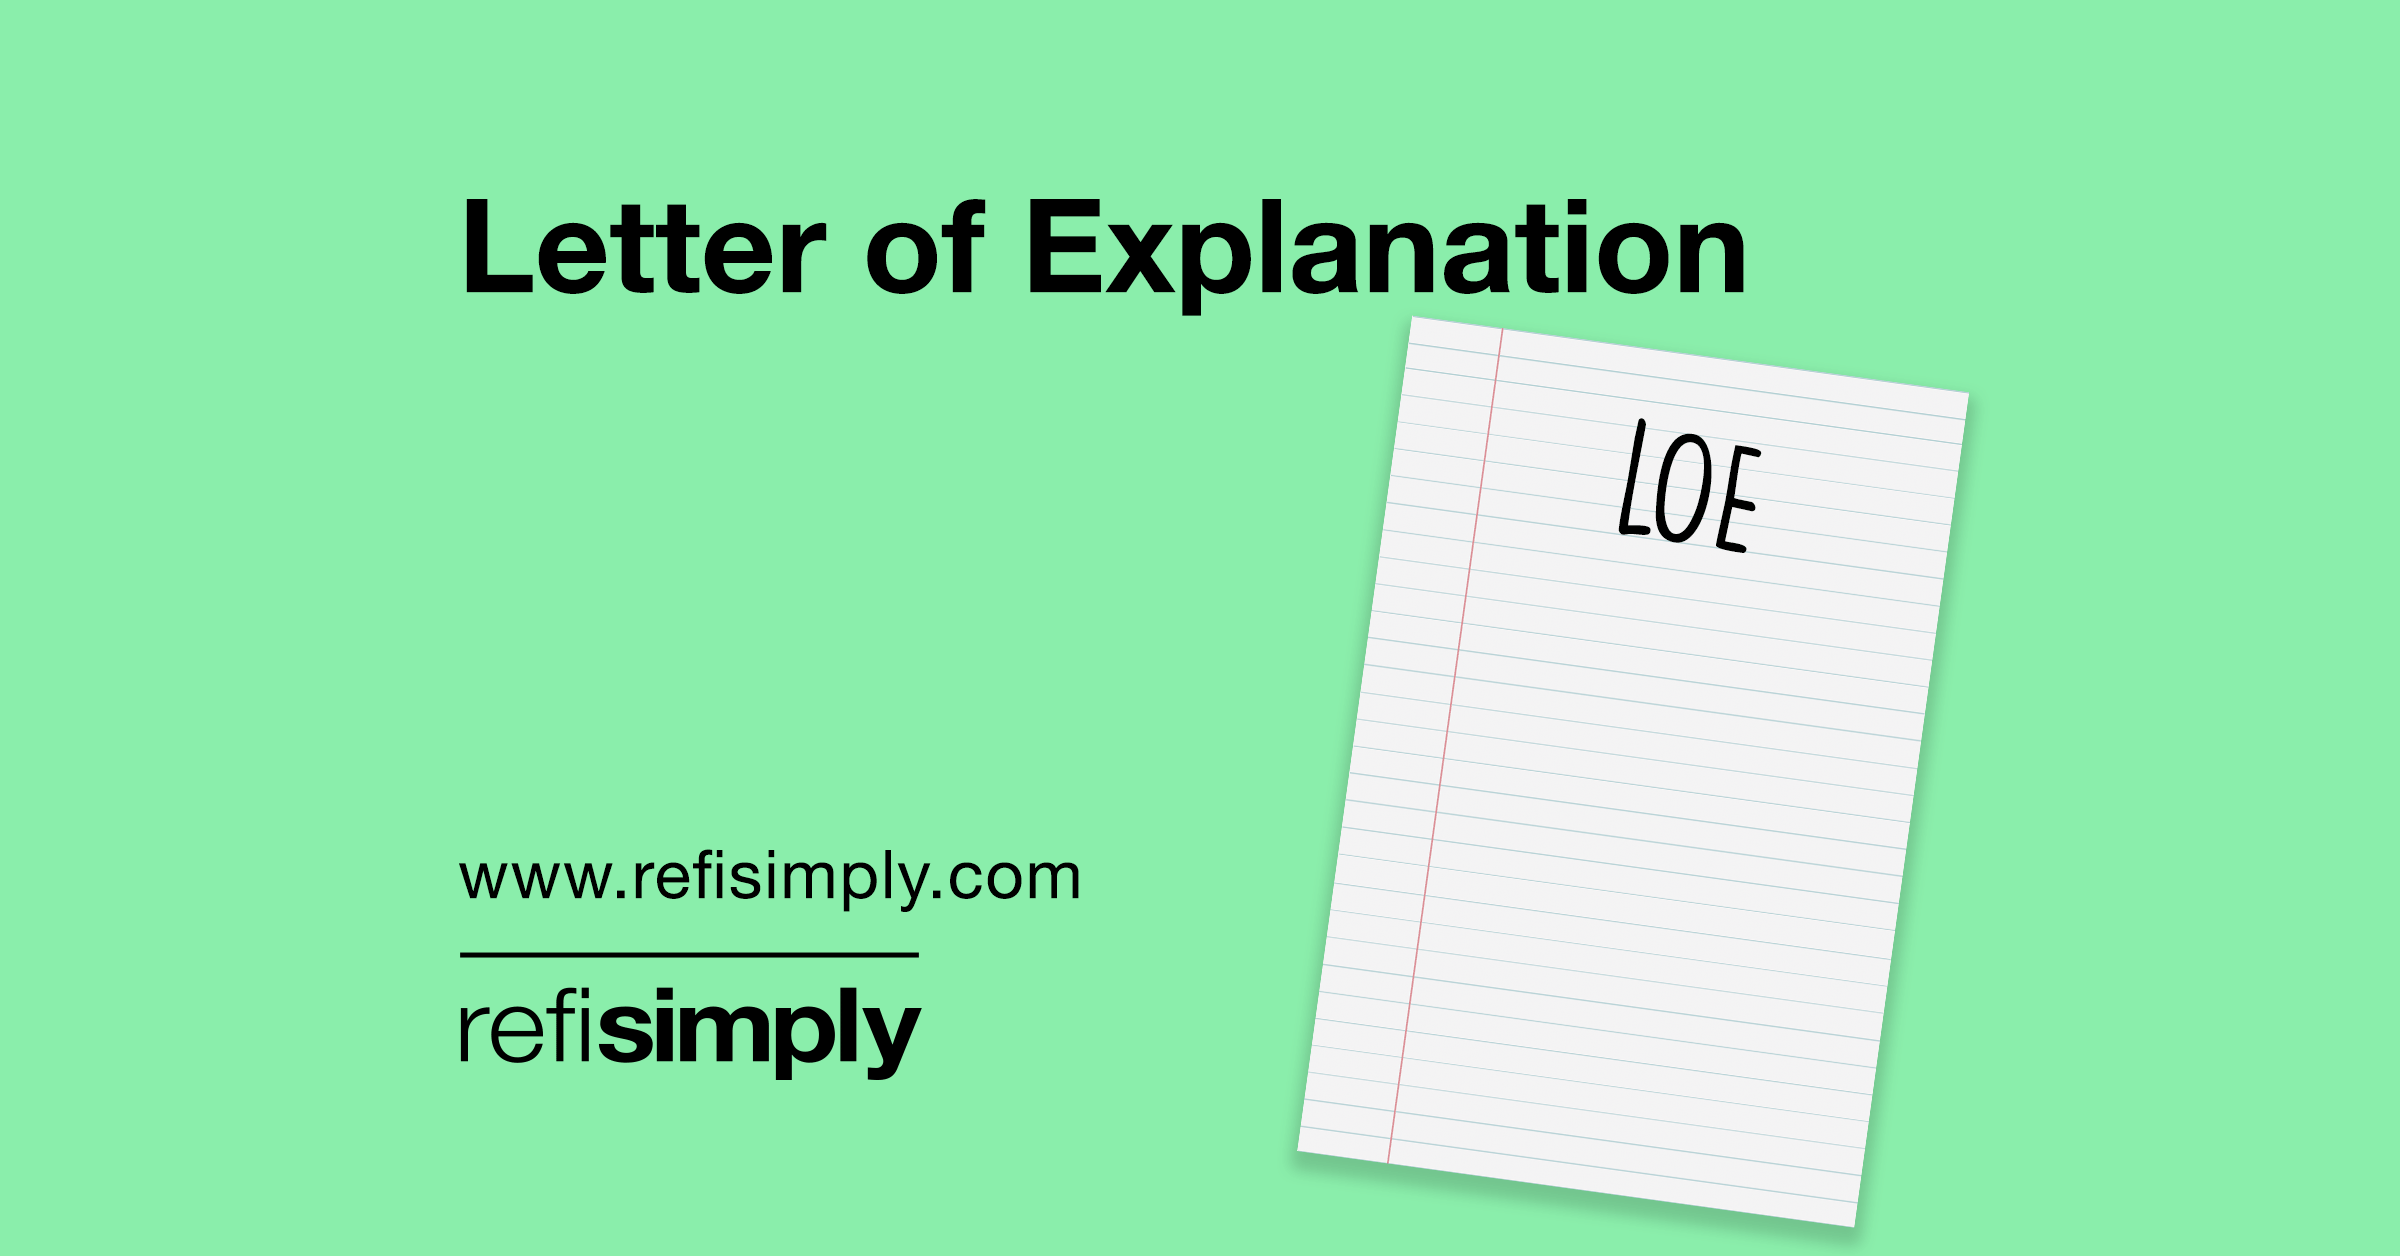 LOE-Letter of Explanation